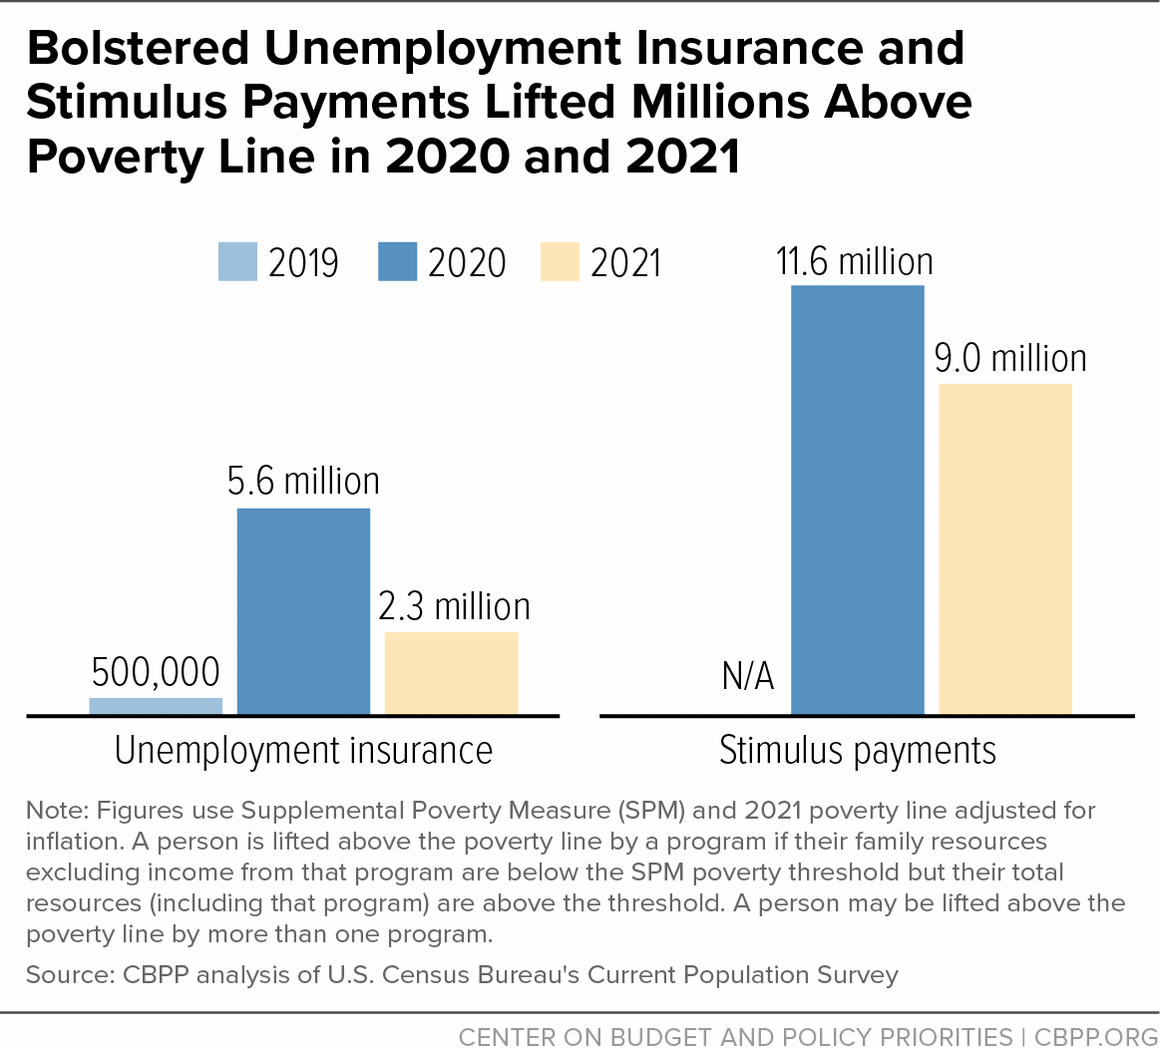 Bolstered Unemployment Insurance and Stimulus Payments Lifted Millions Above Poverty Line in 2020 and 2021